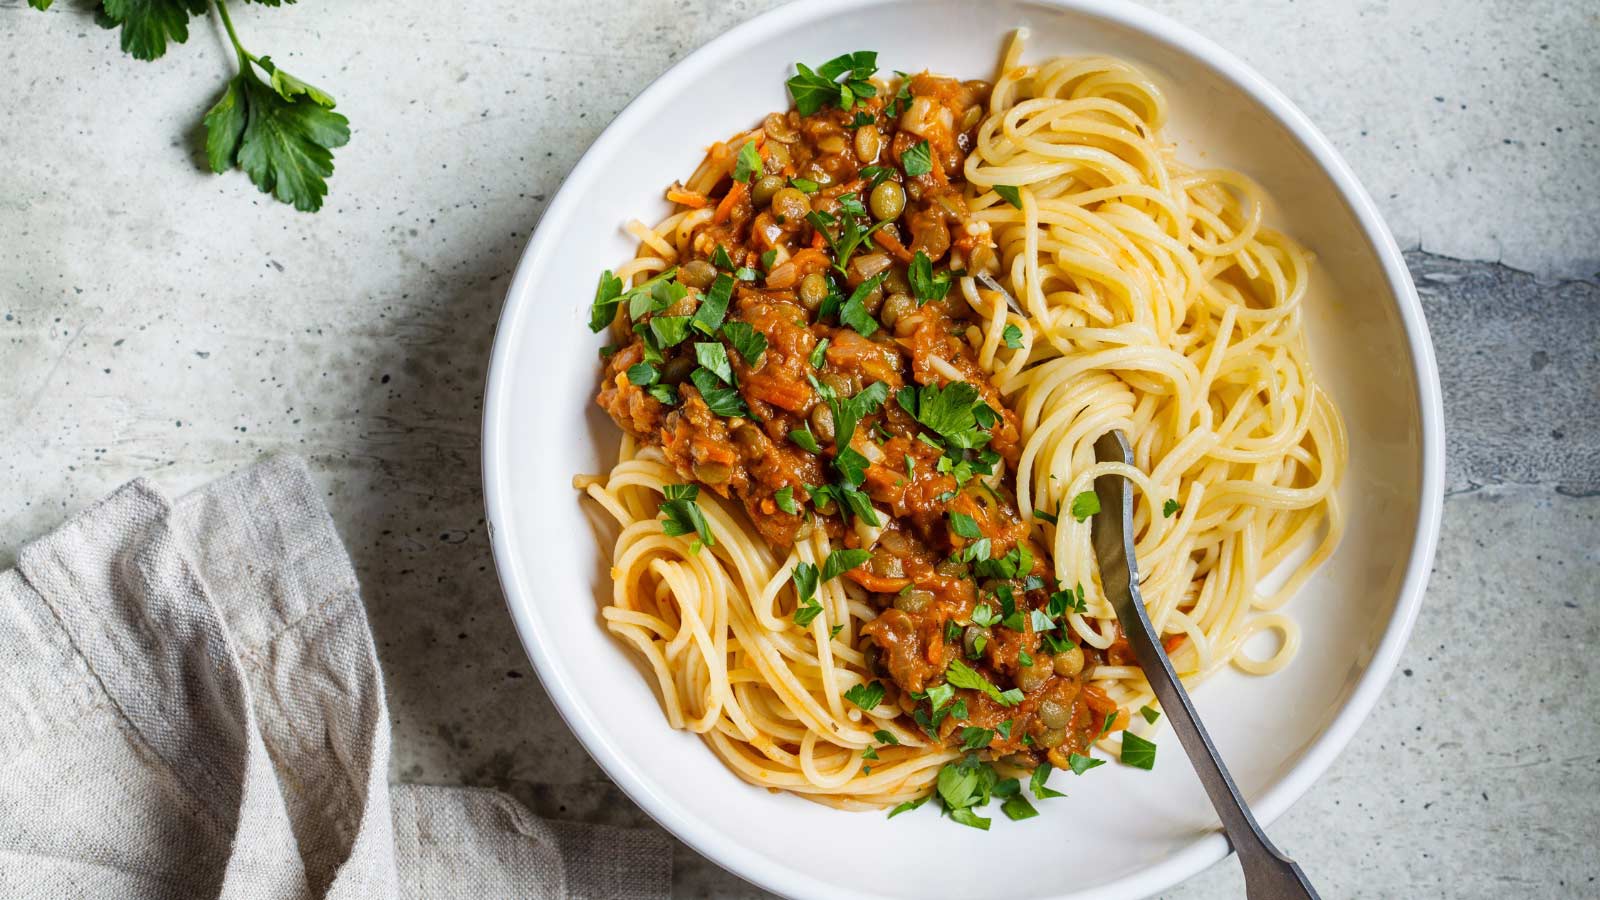 12 Delicious Meals You Can Make With Lentils